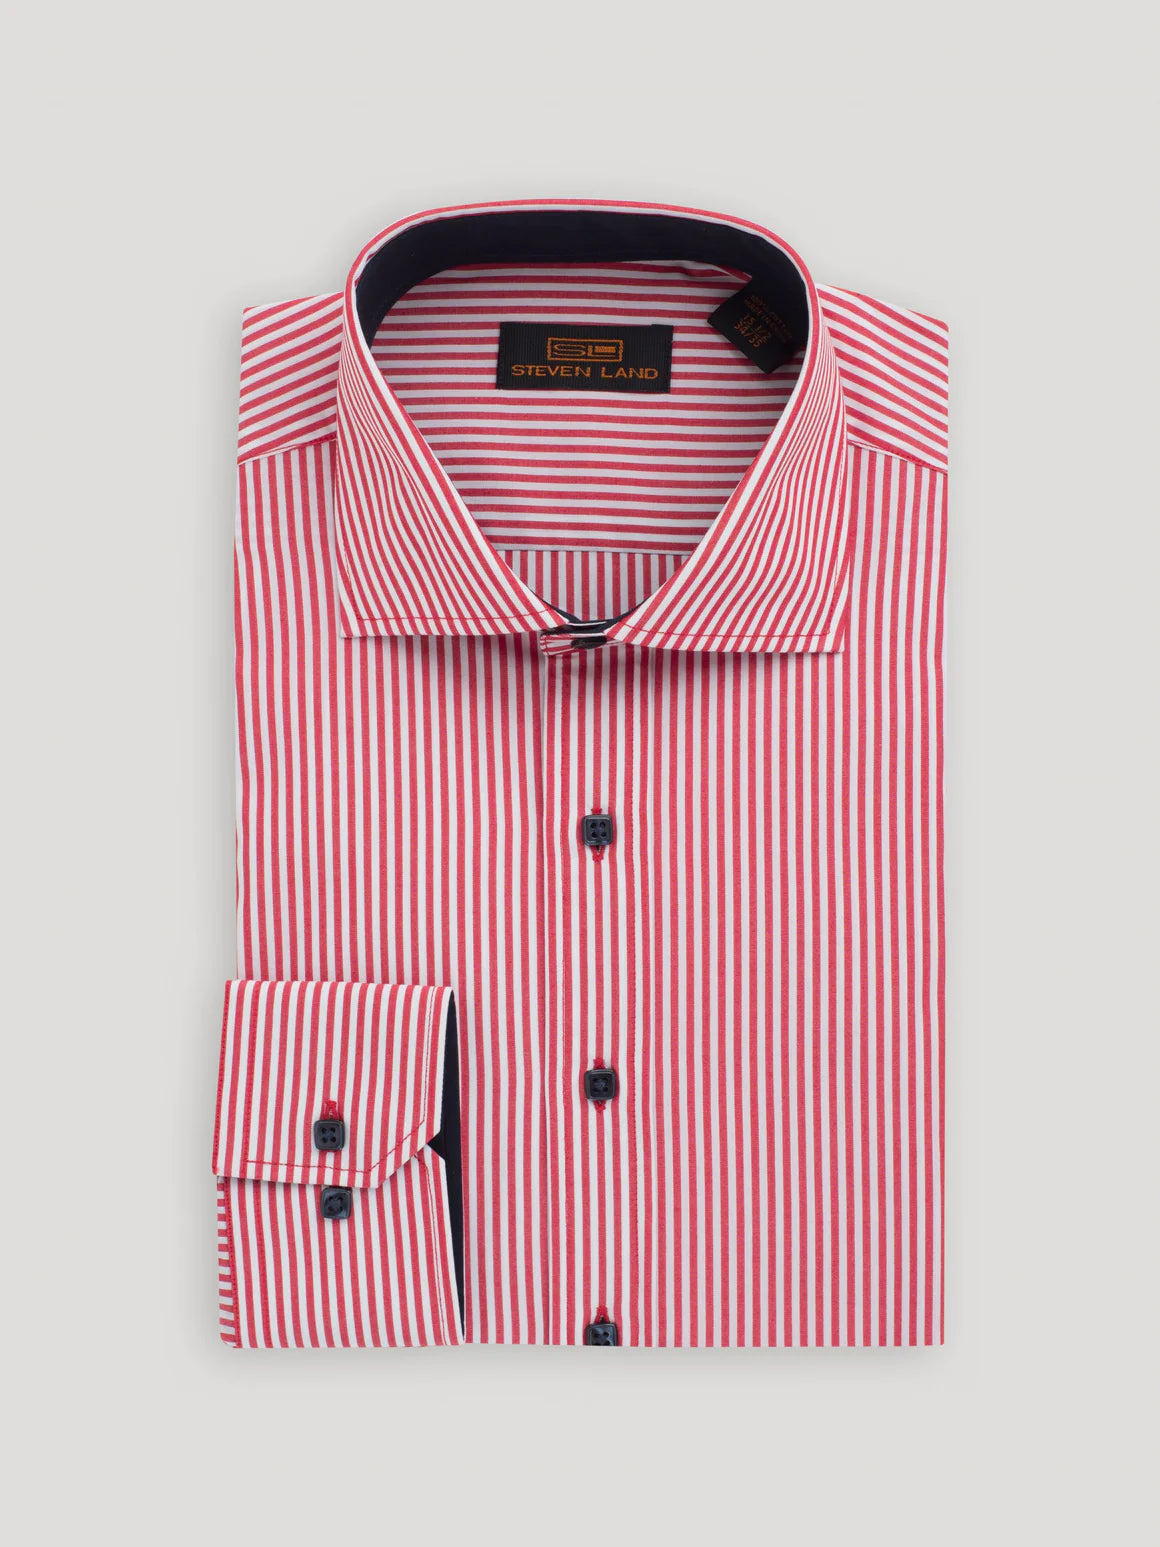 Steven Land Mens Classic Fit Red & White Striped 100% Cotton Dress Shirt